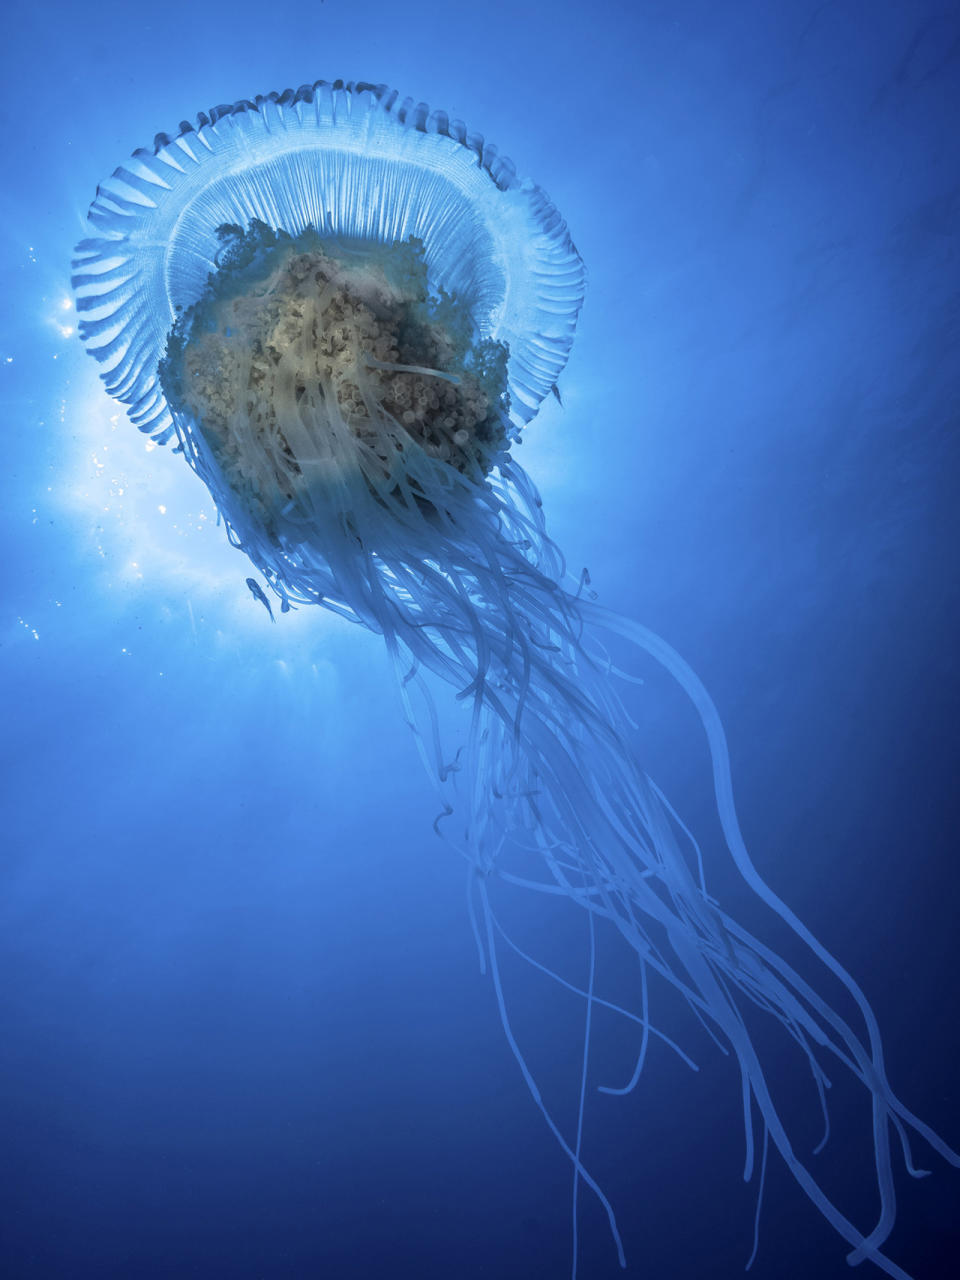 <p>A rainbow colored crown jellyfish swims near Protea Banks. (Pier A. Mane/Caters News)</p>